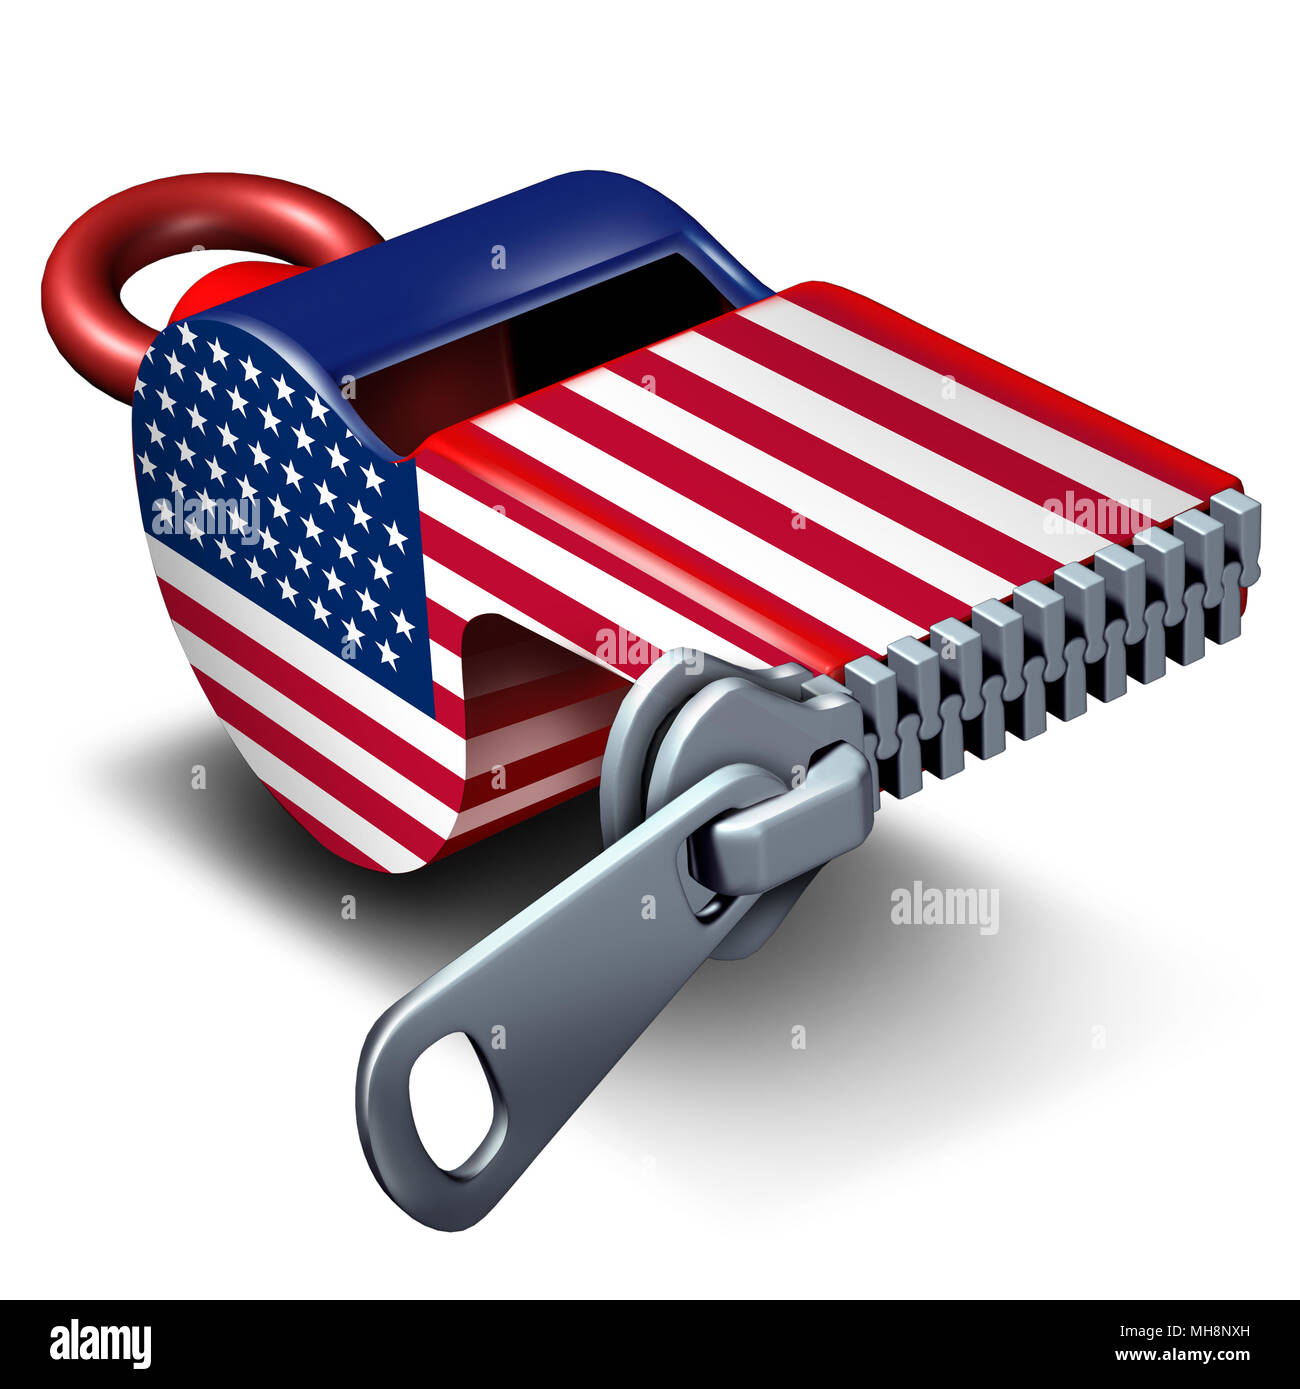 American freedom of the press and civil rights news or reporting restriction concept as a closed whistle with the United States flag. Stock Photo